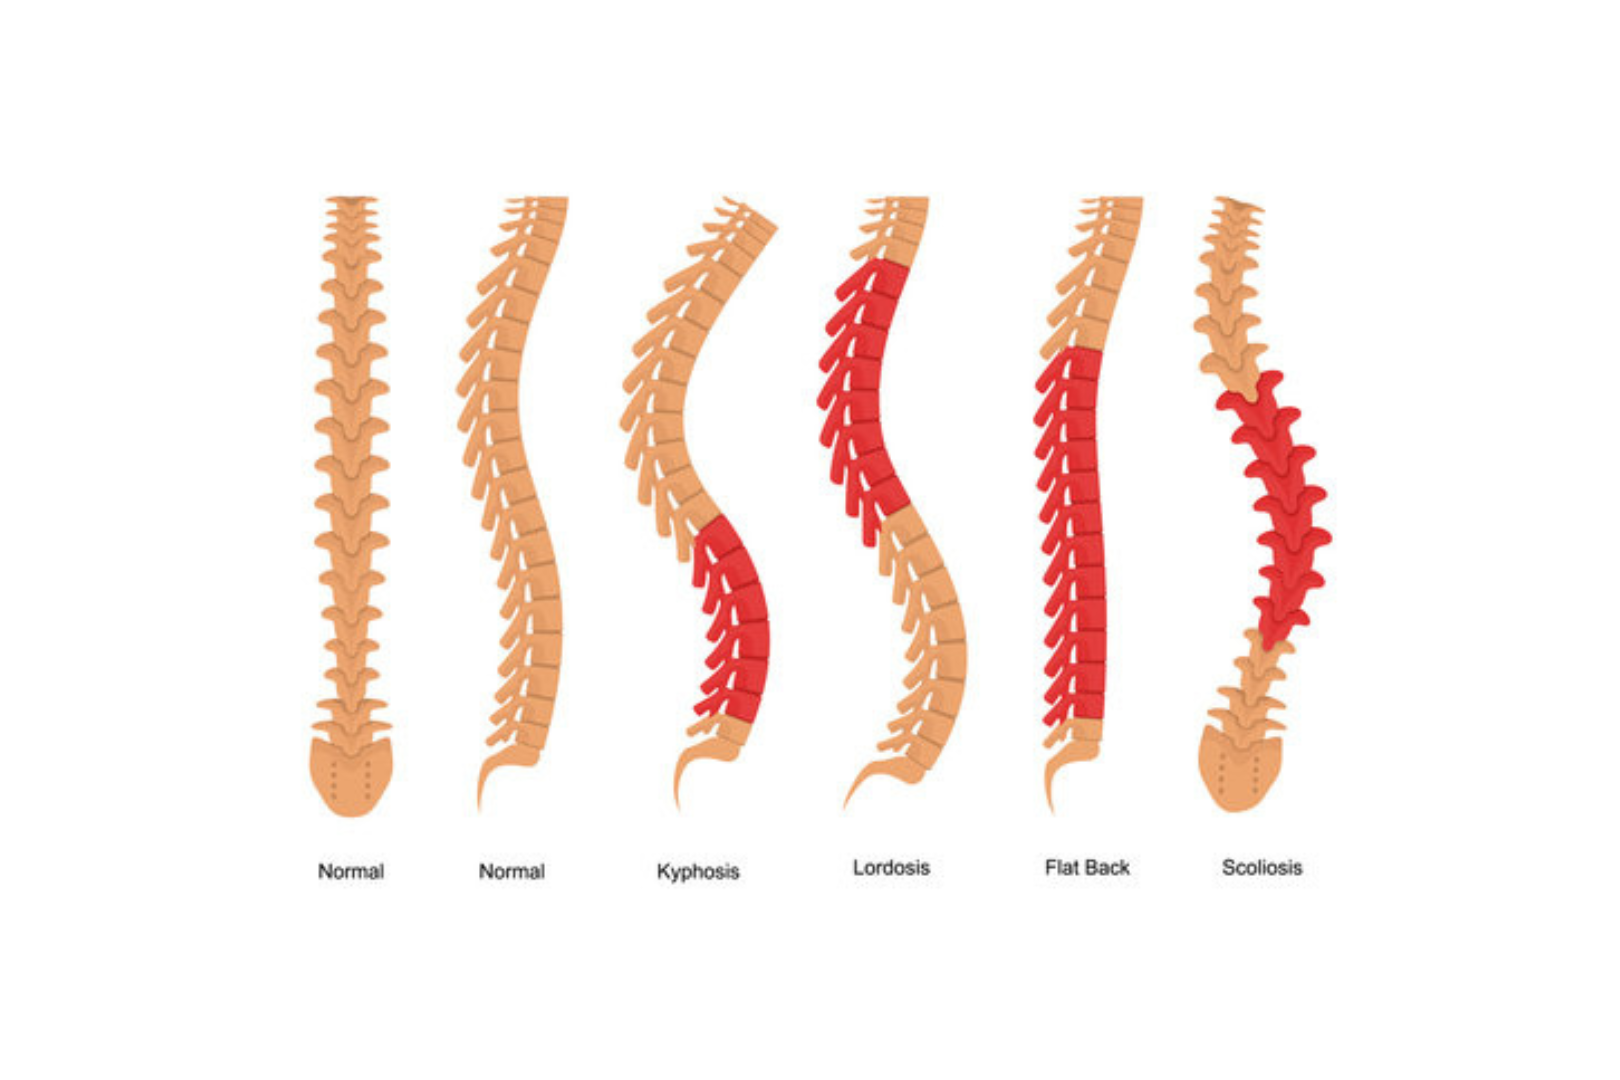  A graphic that compares hyperlordosis to kyphosis to scoliosis (could add hypolordosis as well)